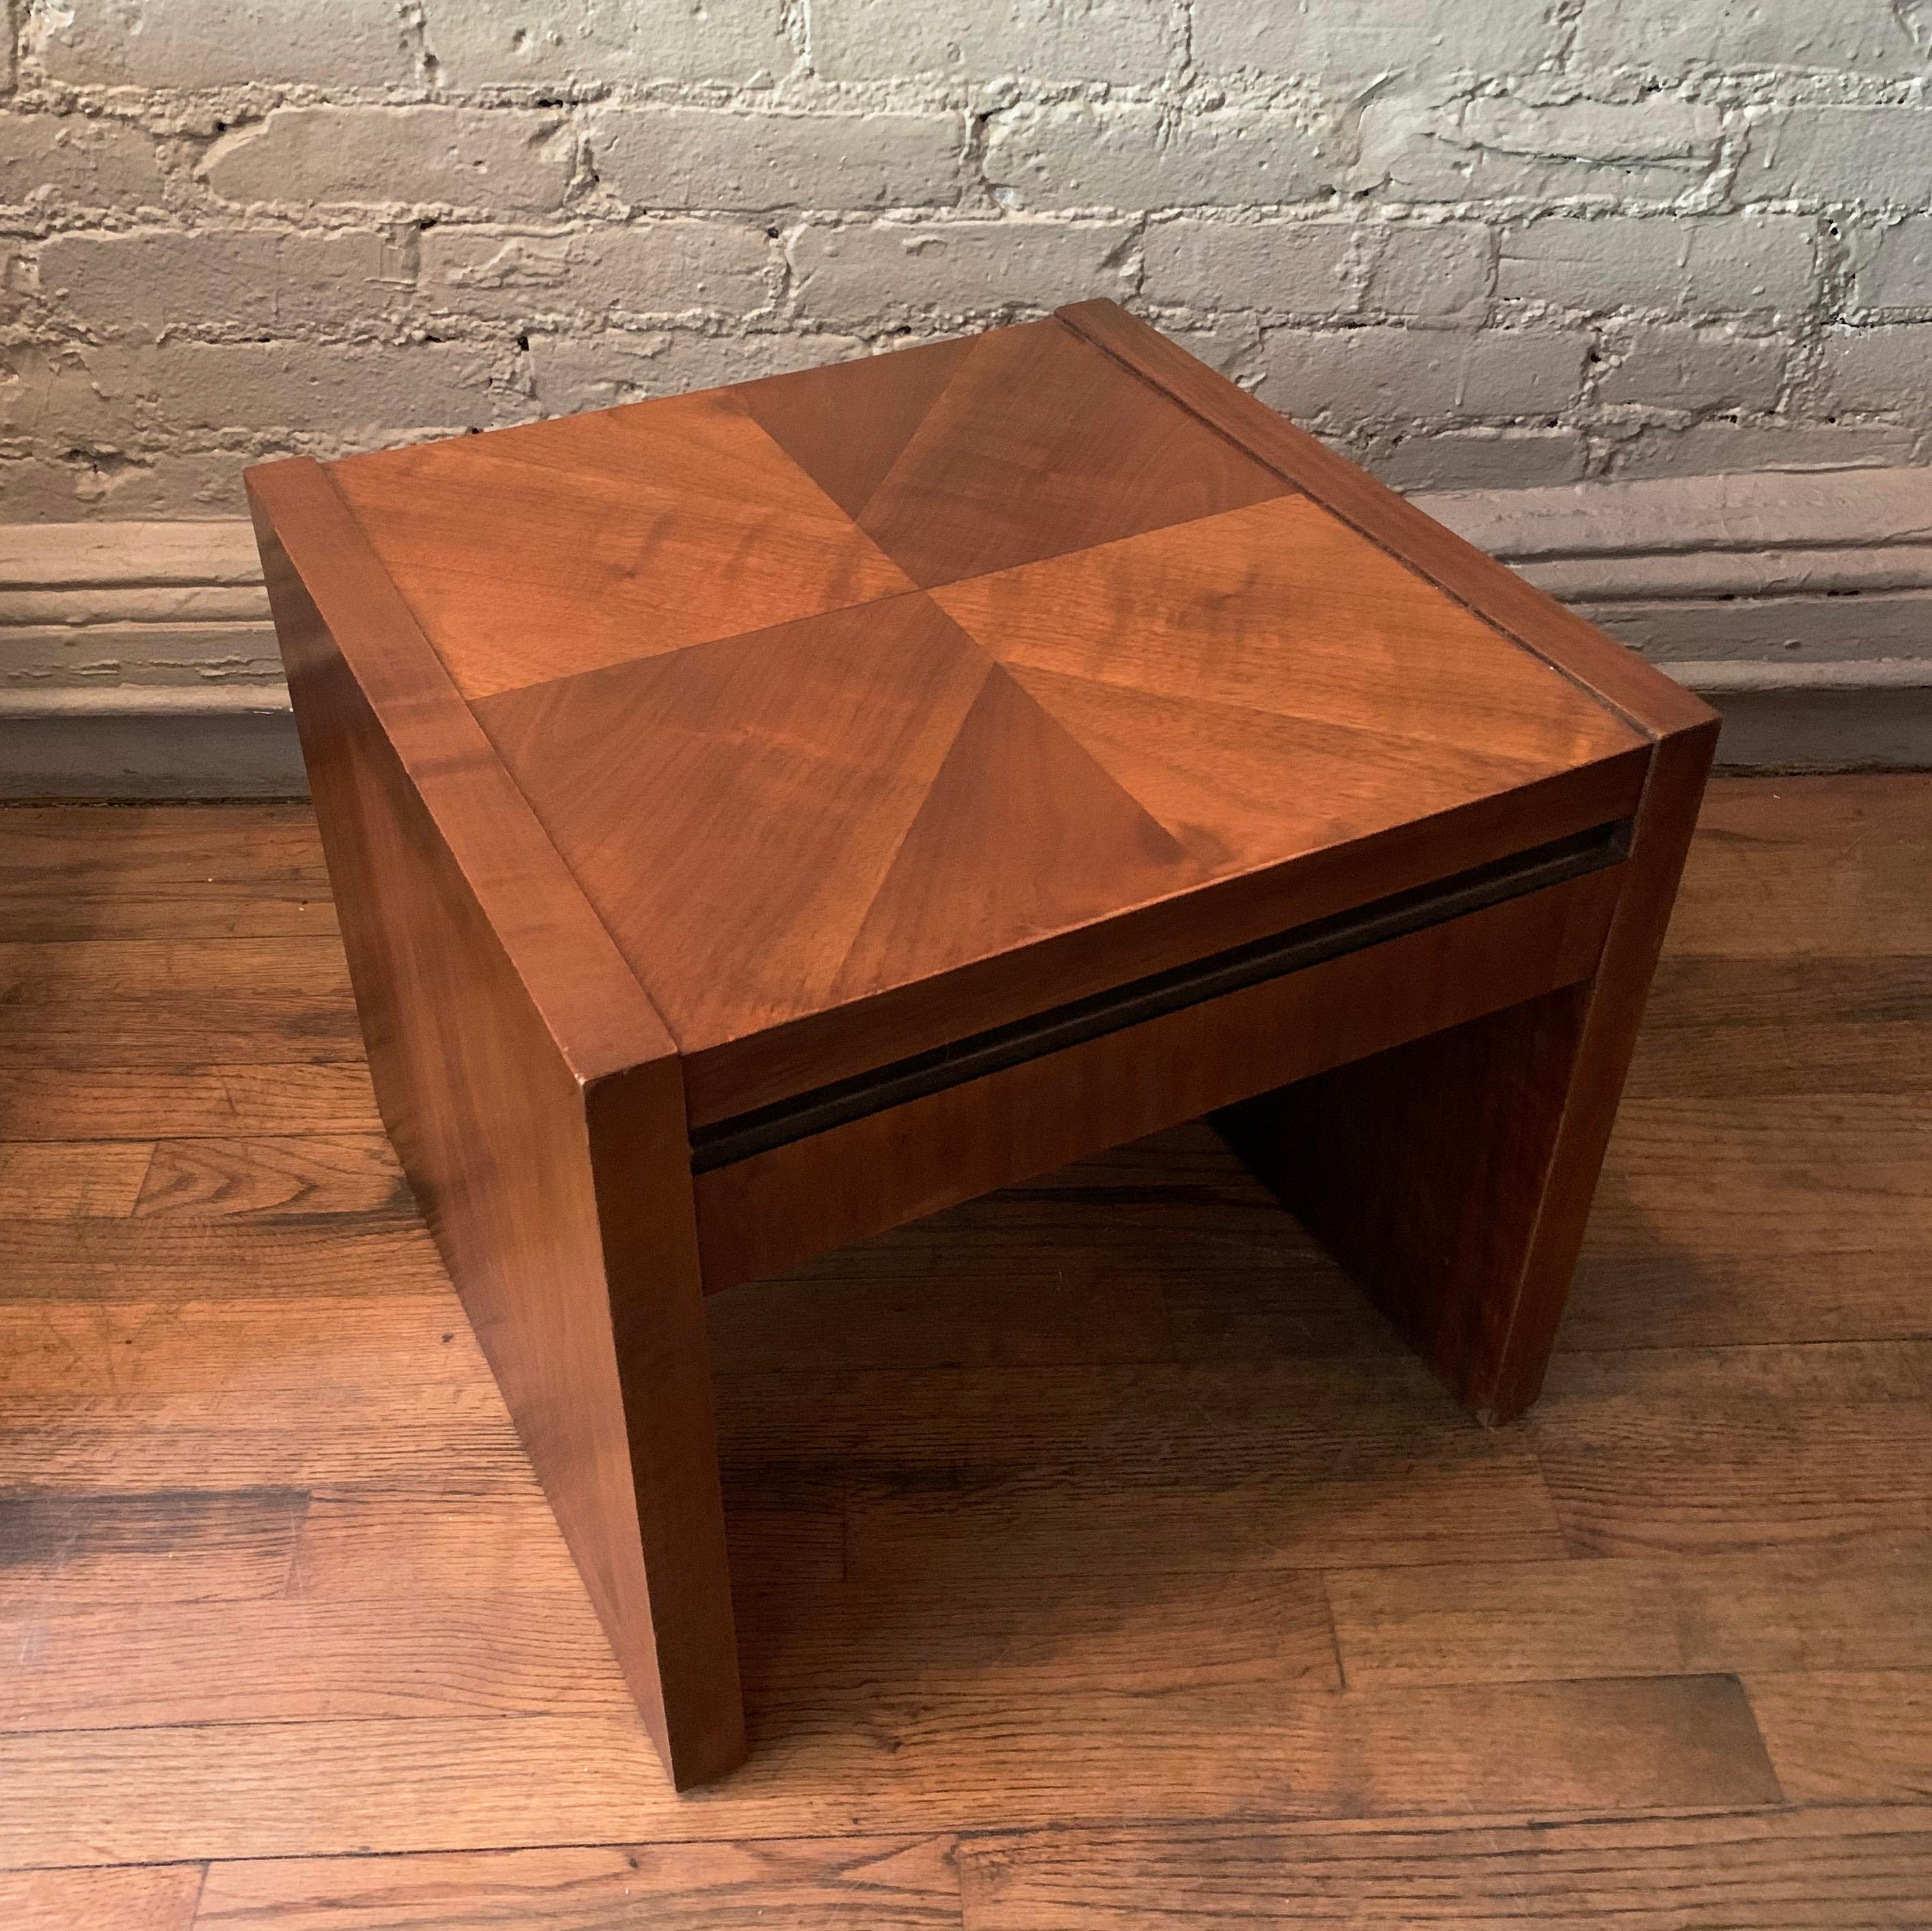 Petite, low, walnut, side or coffee table by Altavista Lane features a parquetry top.